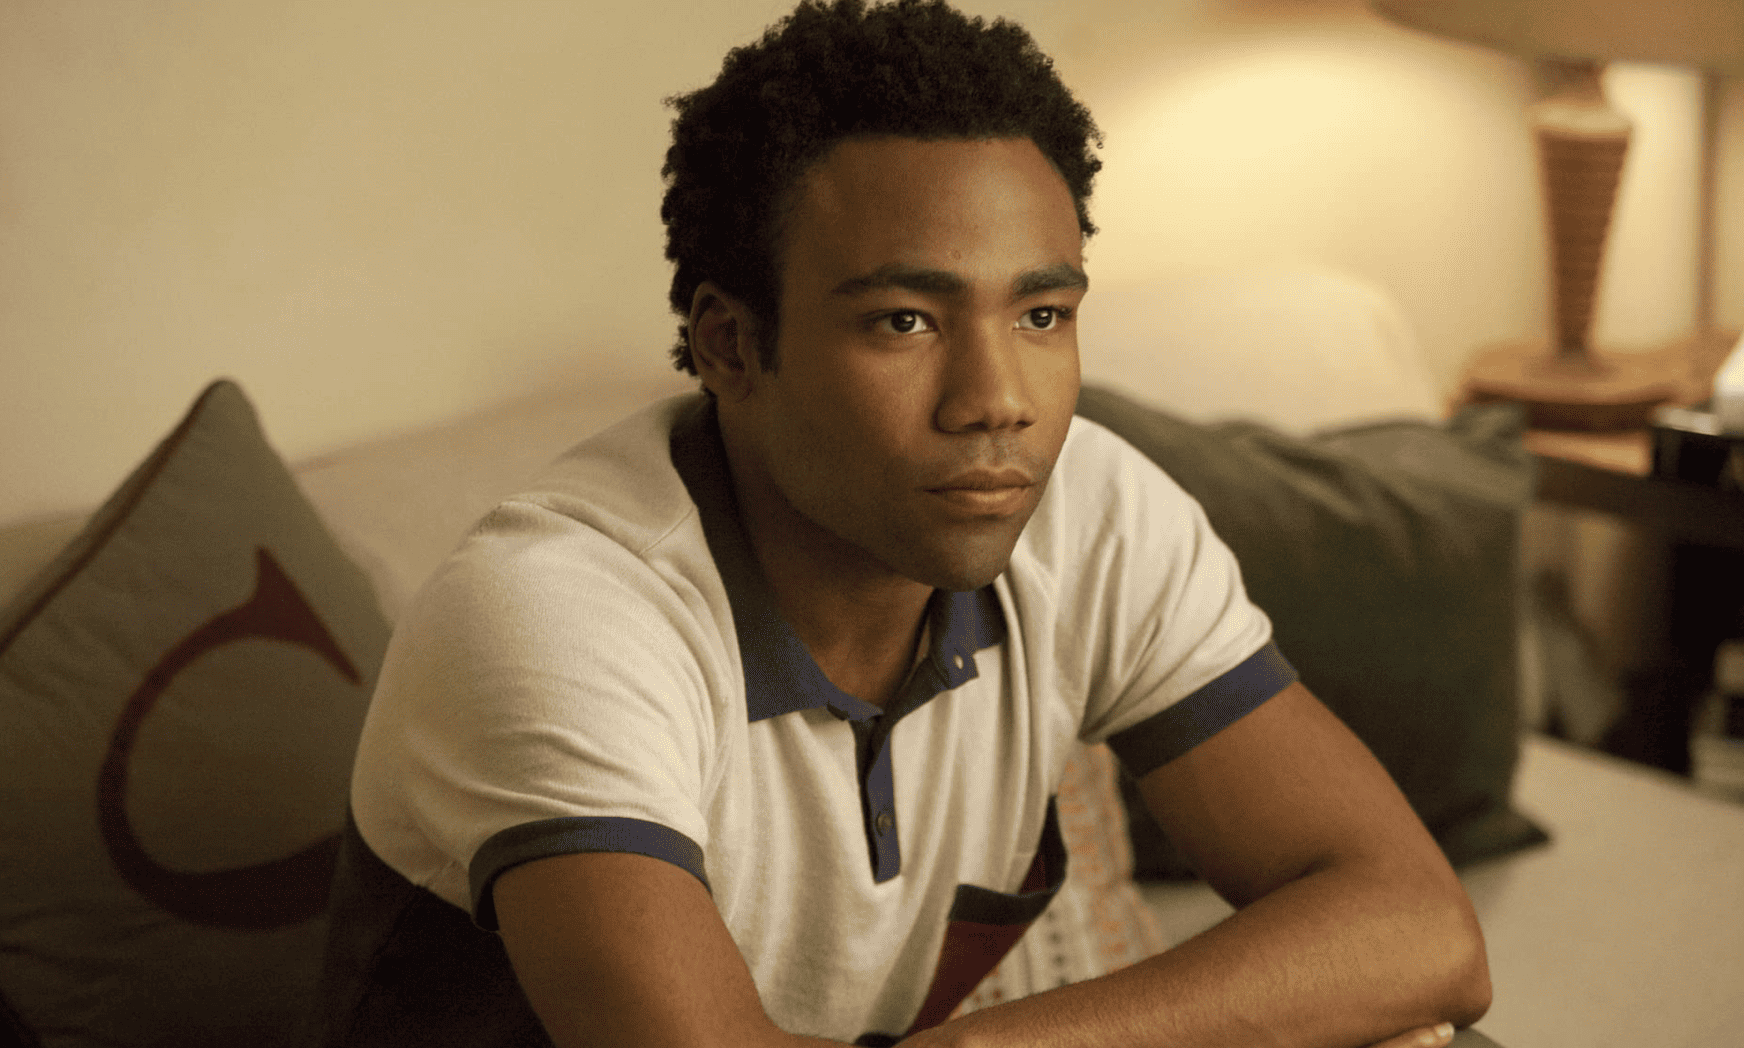 A pensive Donald Glover looks off-camera in this image from Apatow Productions